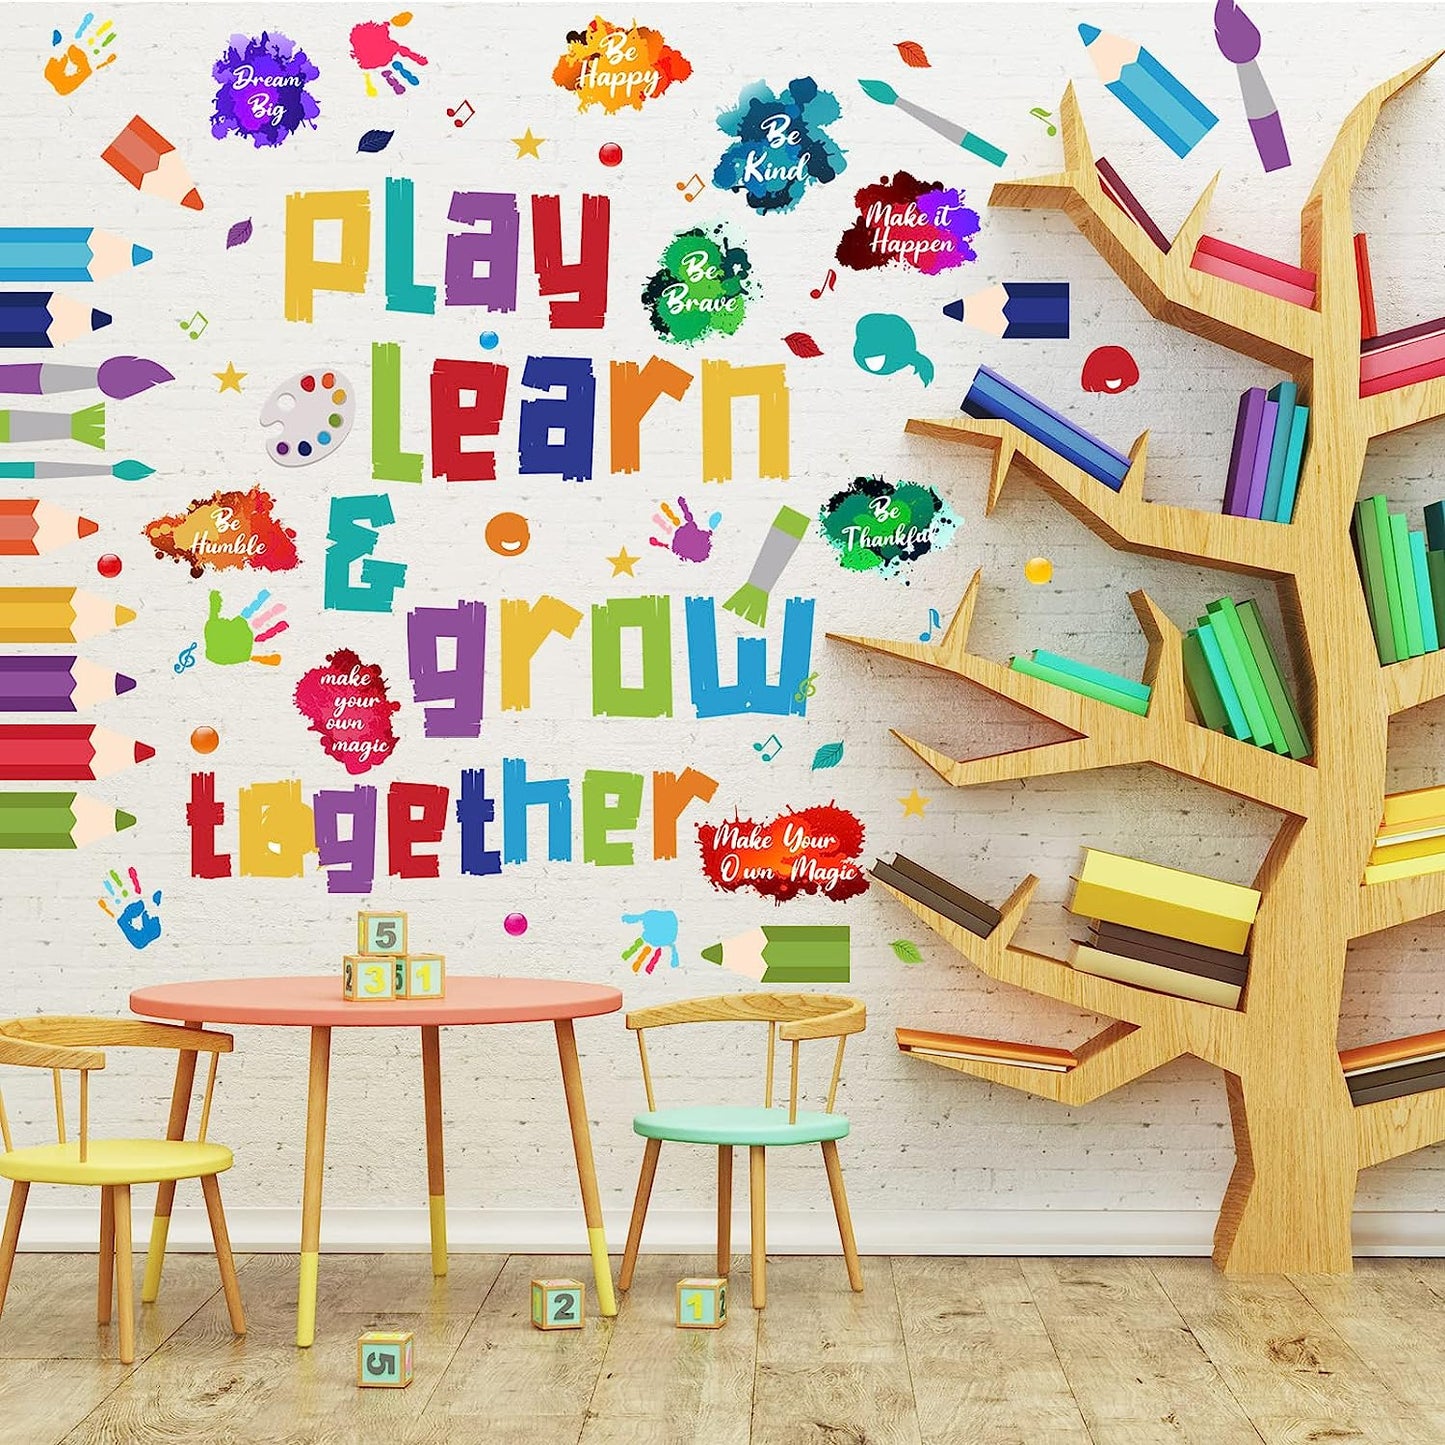 Kids Wall Decals Classroom Decals Colorful Inspirational Wall Decals Daycare Decals Playroom Wall Decor Motivational Wall Decals Positive Saying Sticker Splatter Wall Sticker（Play, Learn）